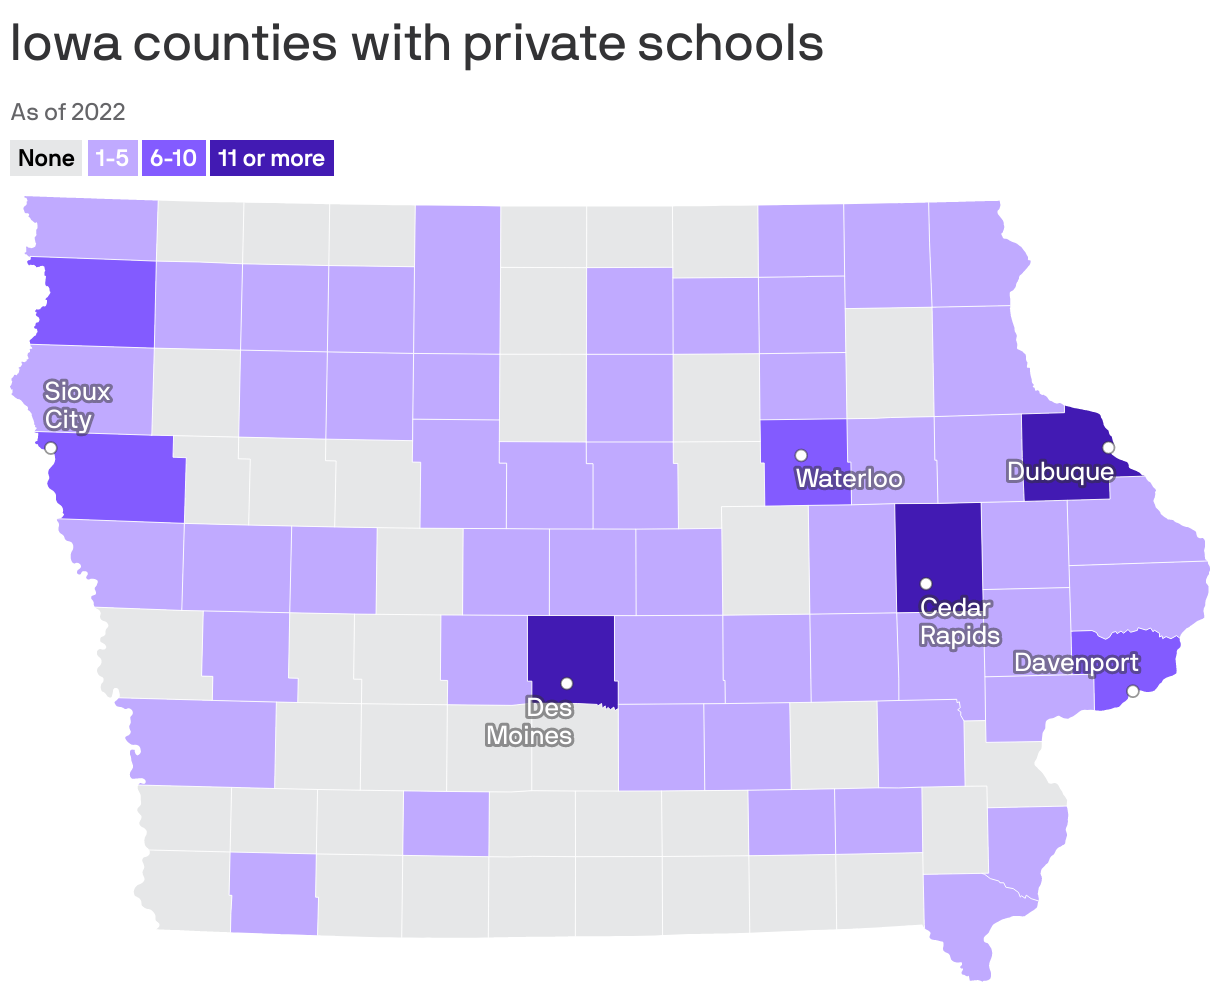 Iowa counties with private schools